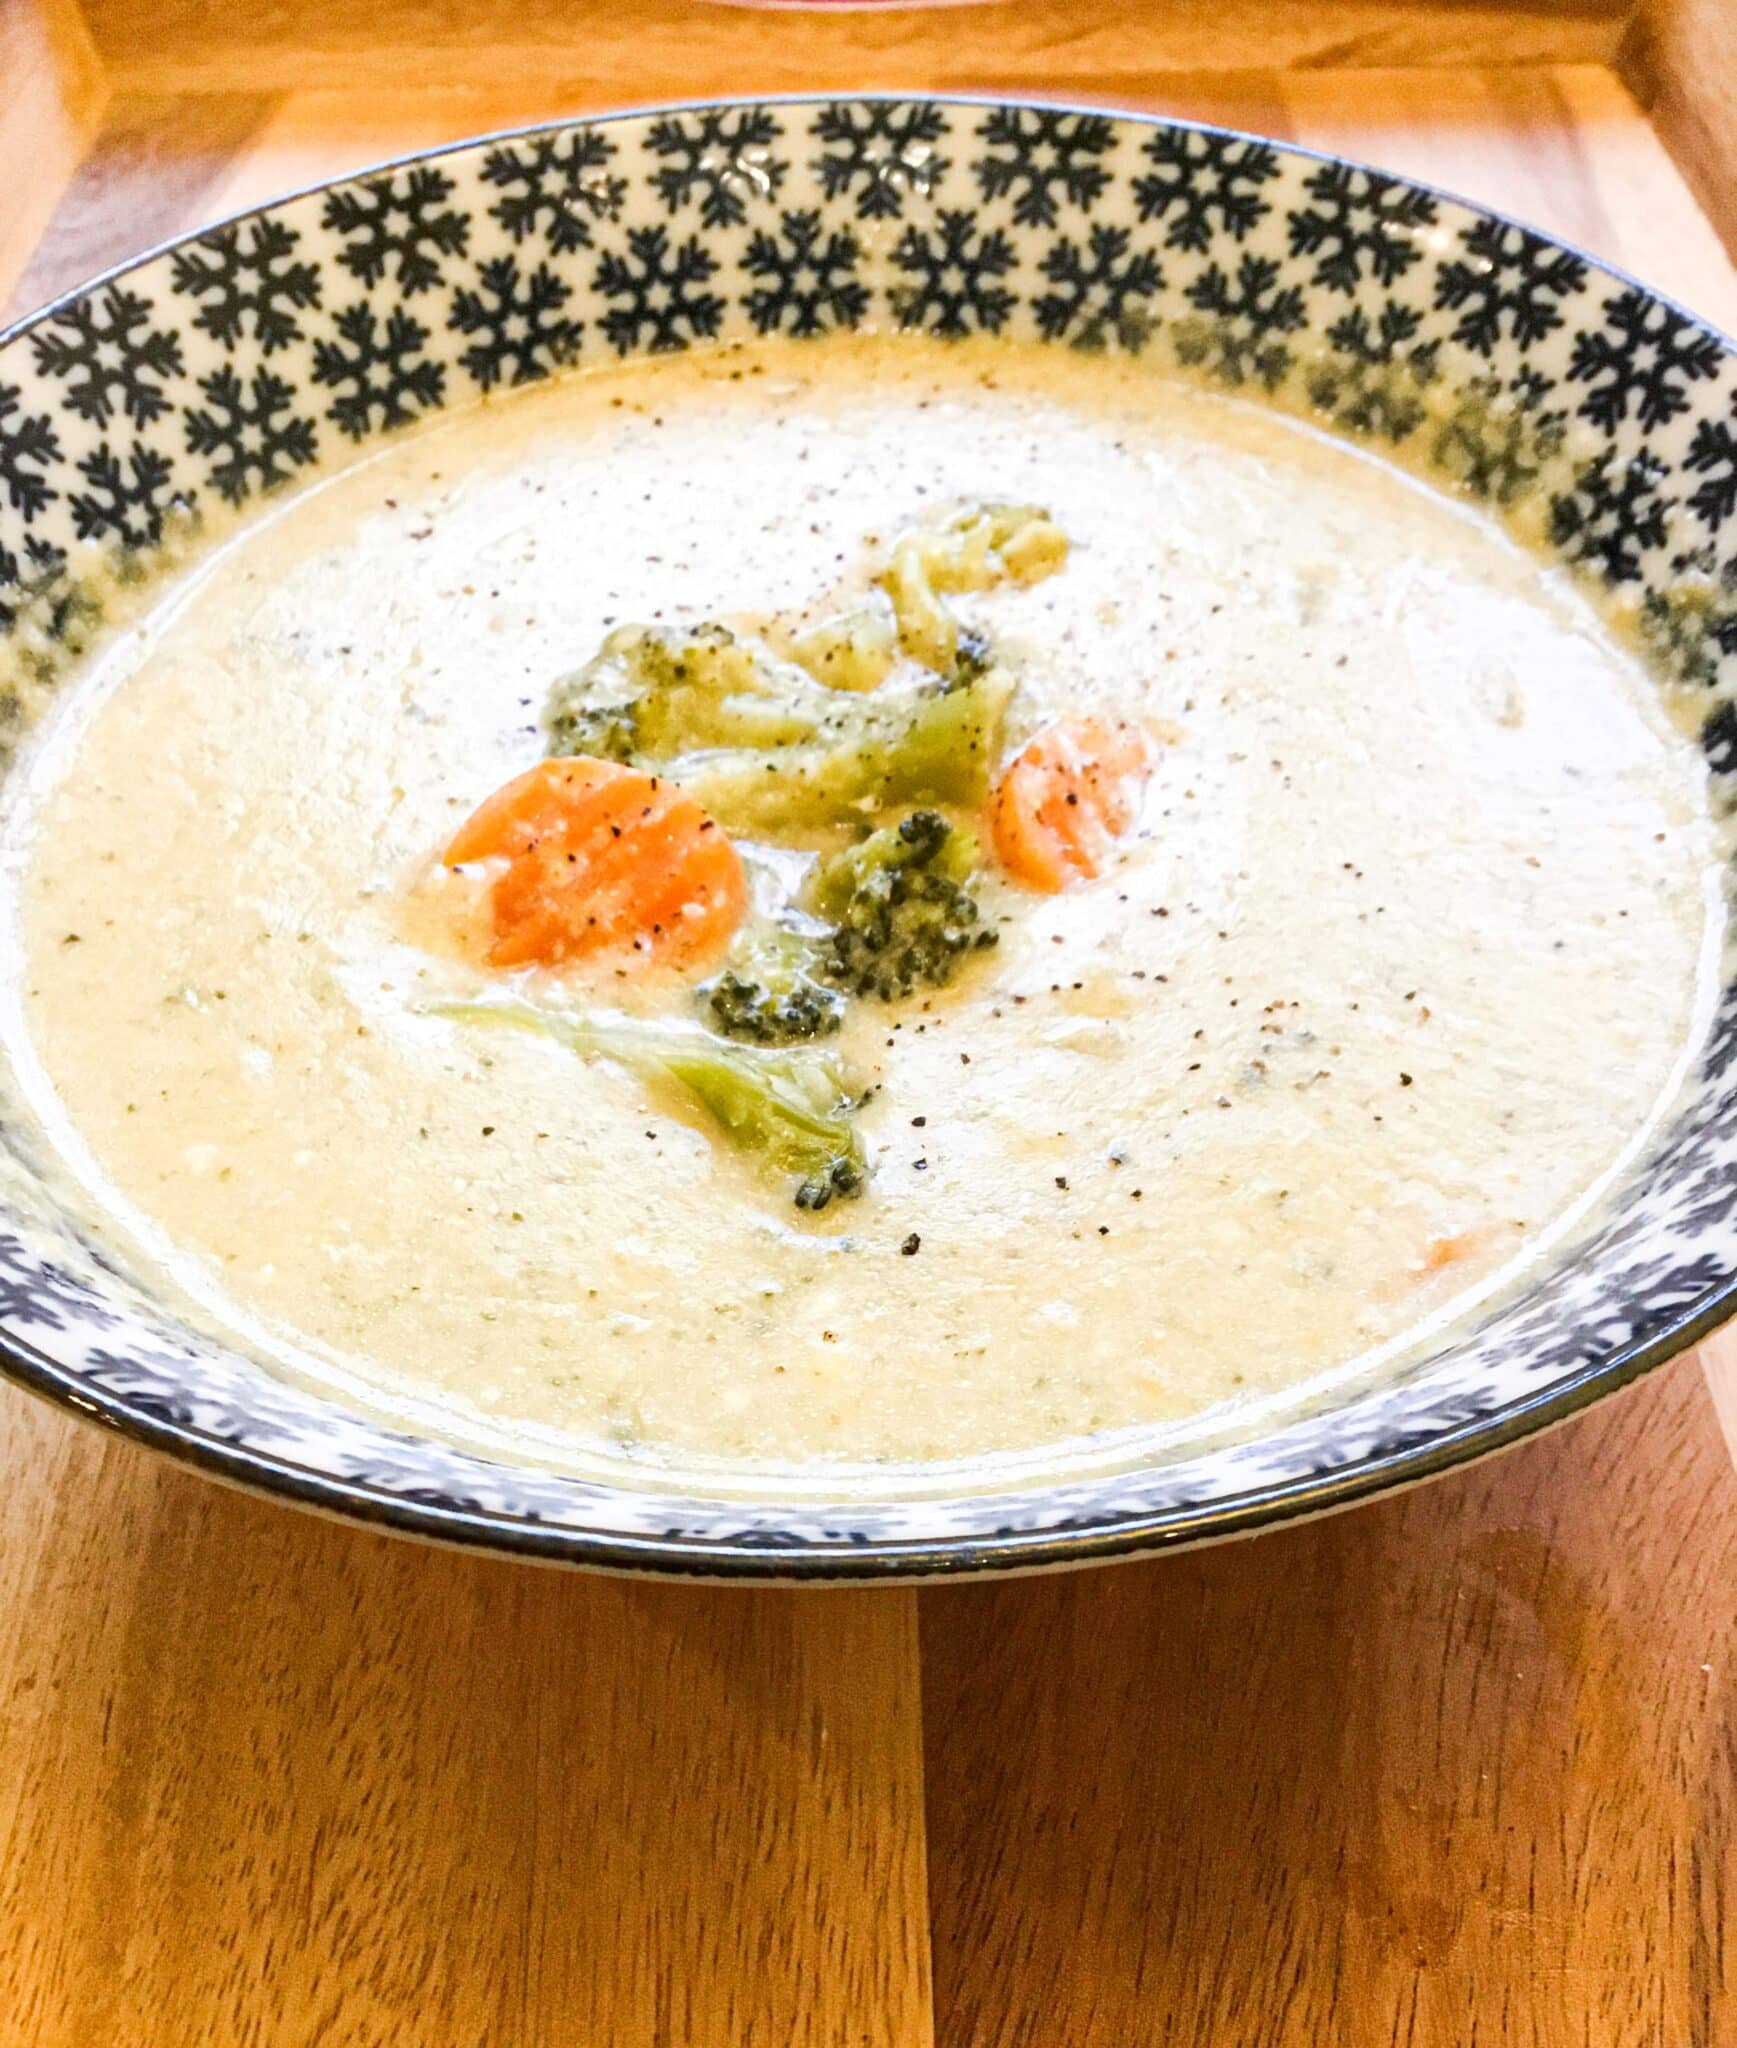 The best broccoli cheddar soup recipe made quick on a bowl ready to serve.